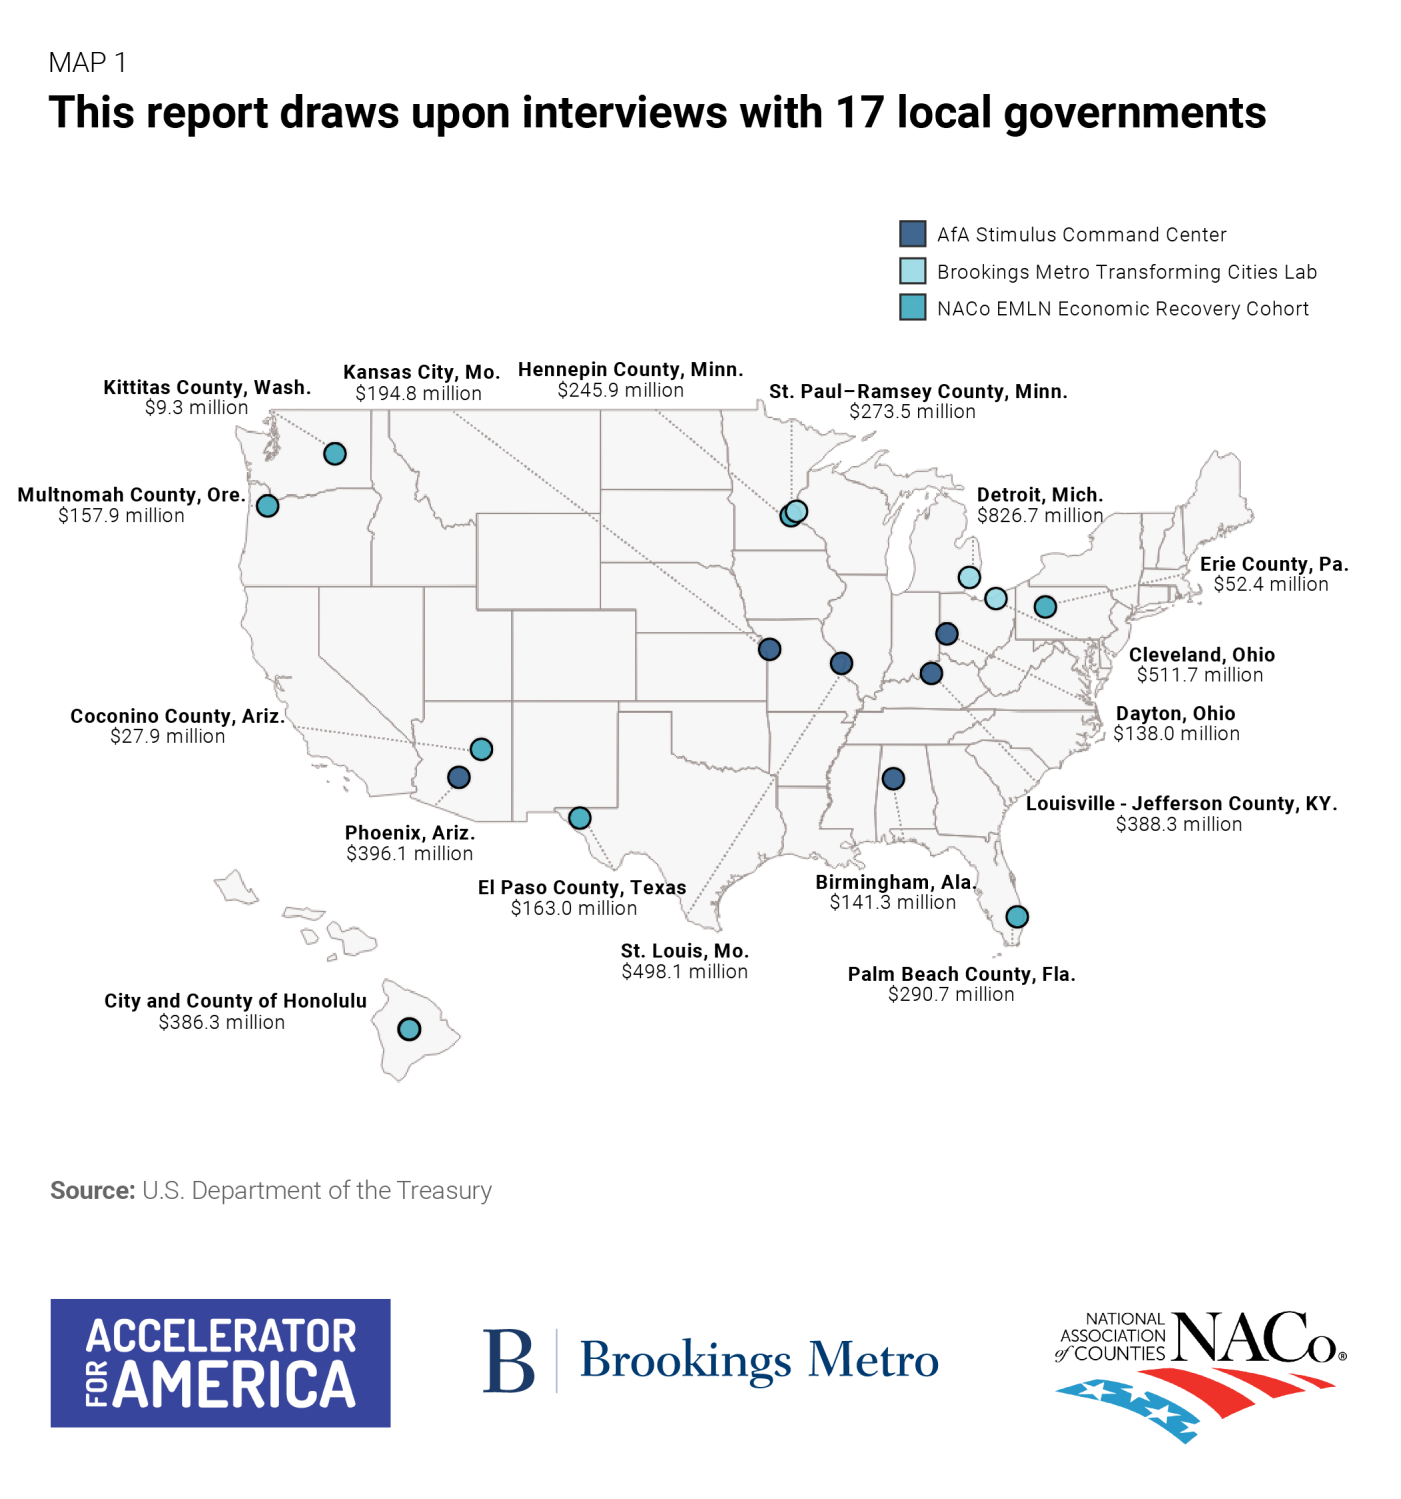 Map 1: This report draws upon interviews with 17 local governments